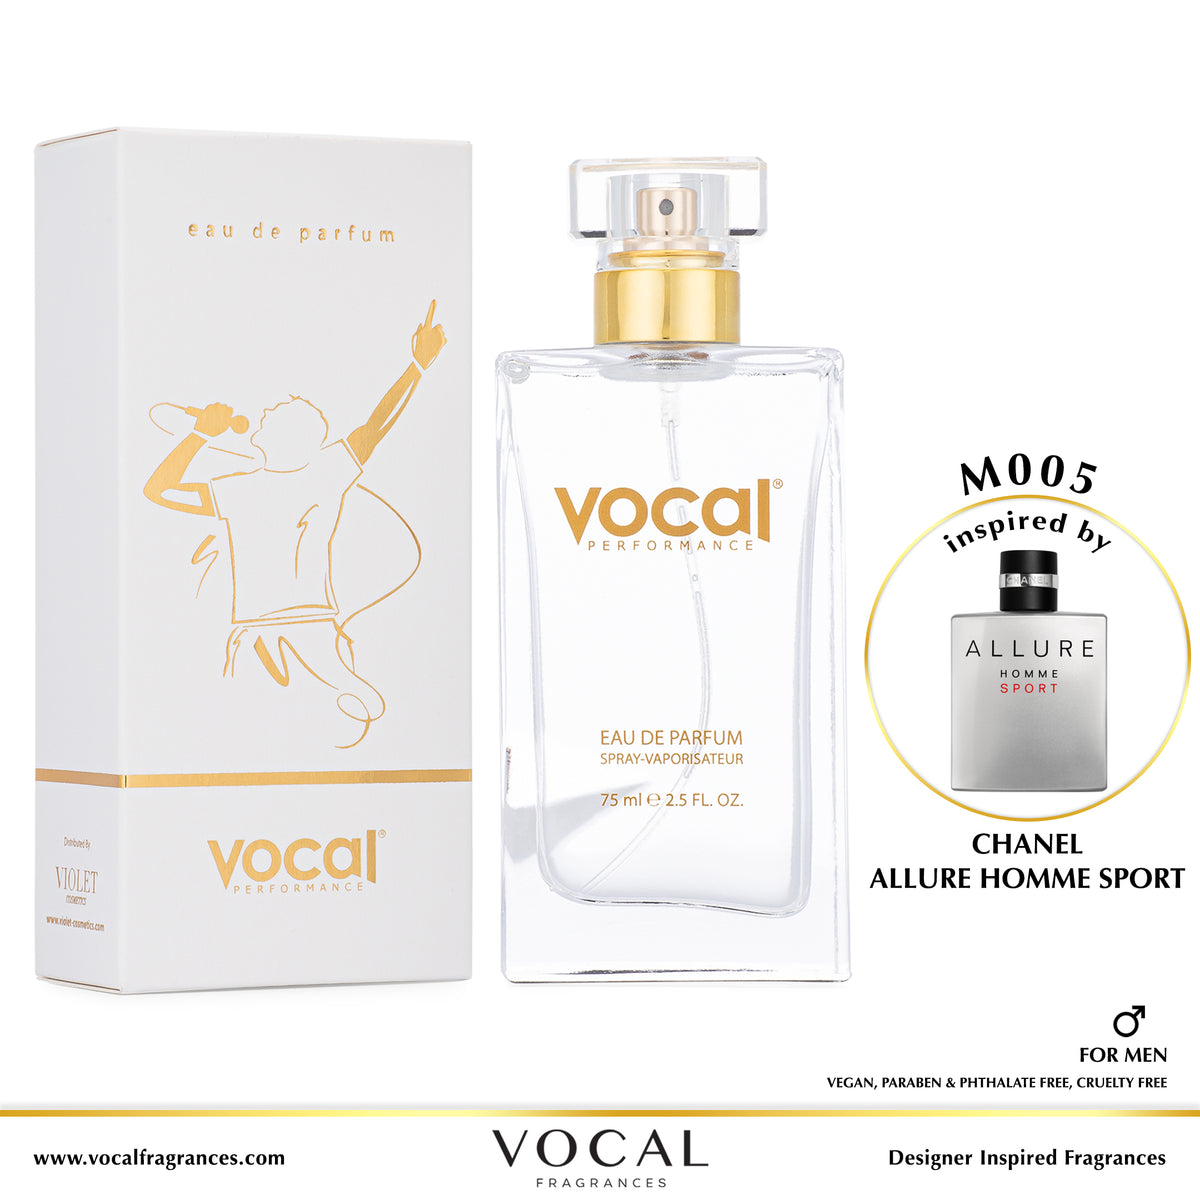  Vocal Performance M005 Eau de Parfum For Men Inspired by Allure  Homme Sport 2.5 FL. OZ. Perfume Vegan, Paraben & Phthalate Free Never  Tested on Animals : Beauty & Personal Care